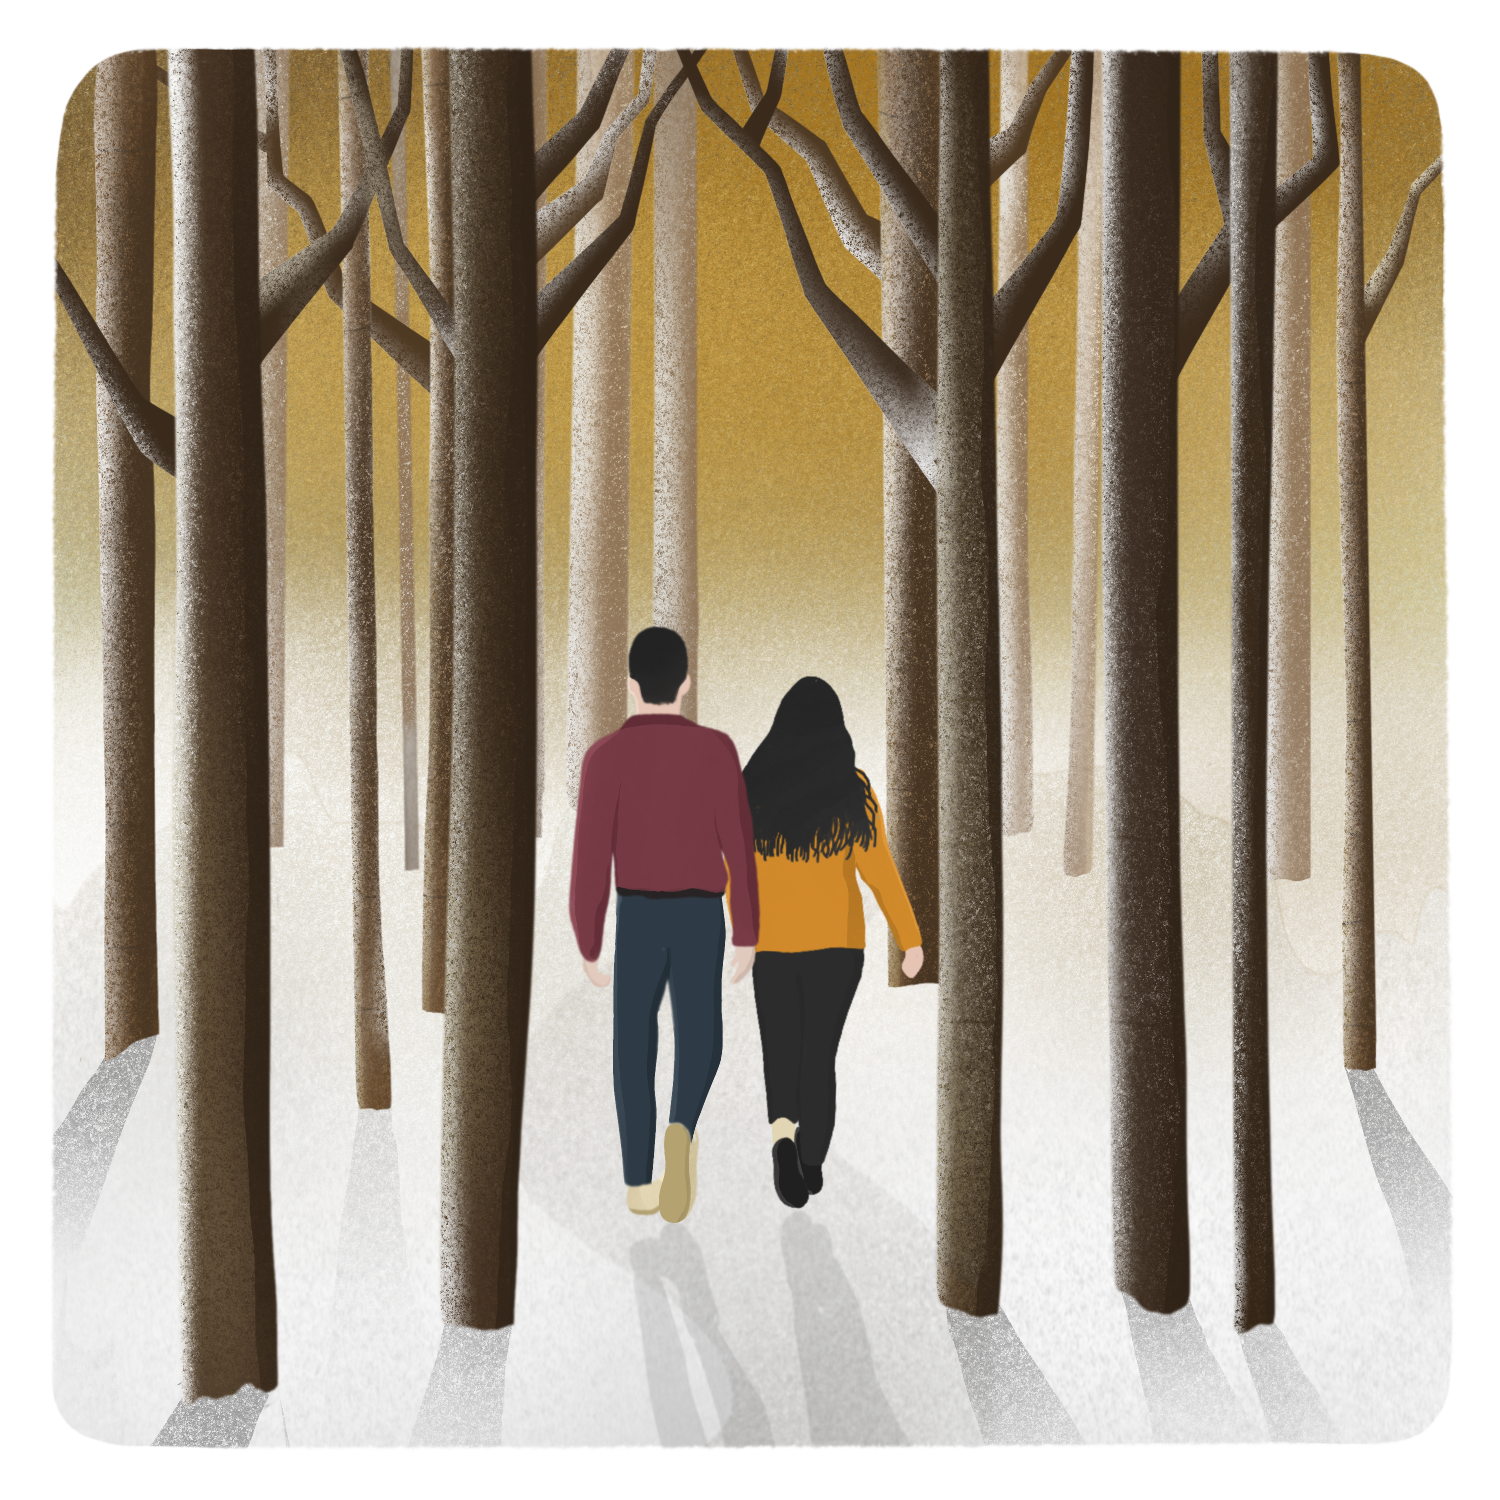 Illustration for the Nature Therapy Course - Walking in the woods